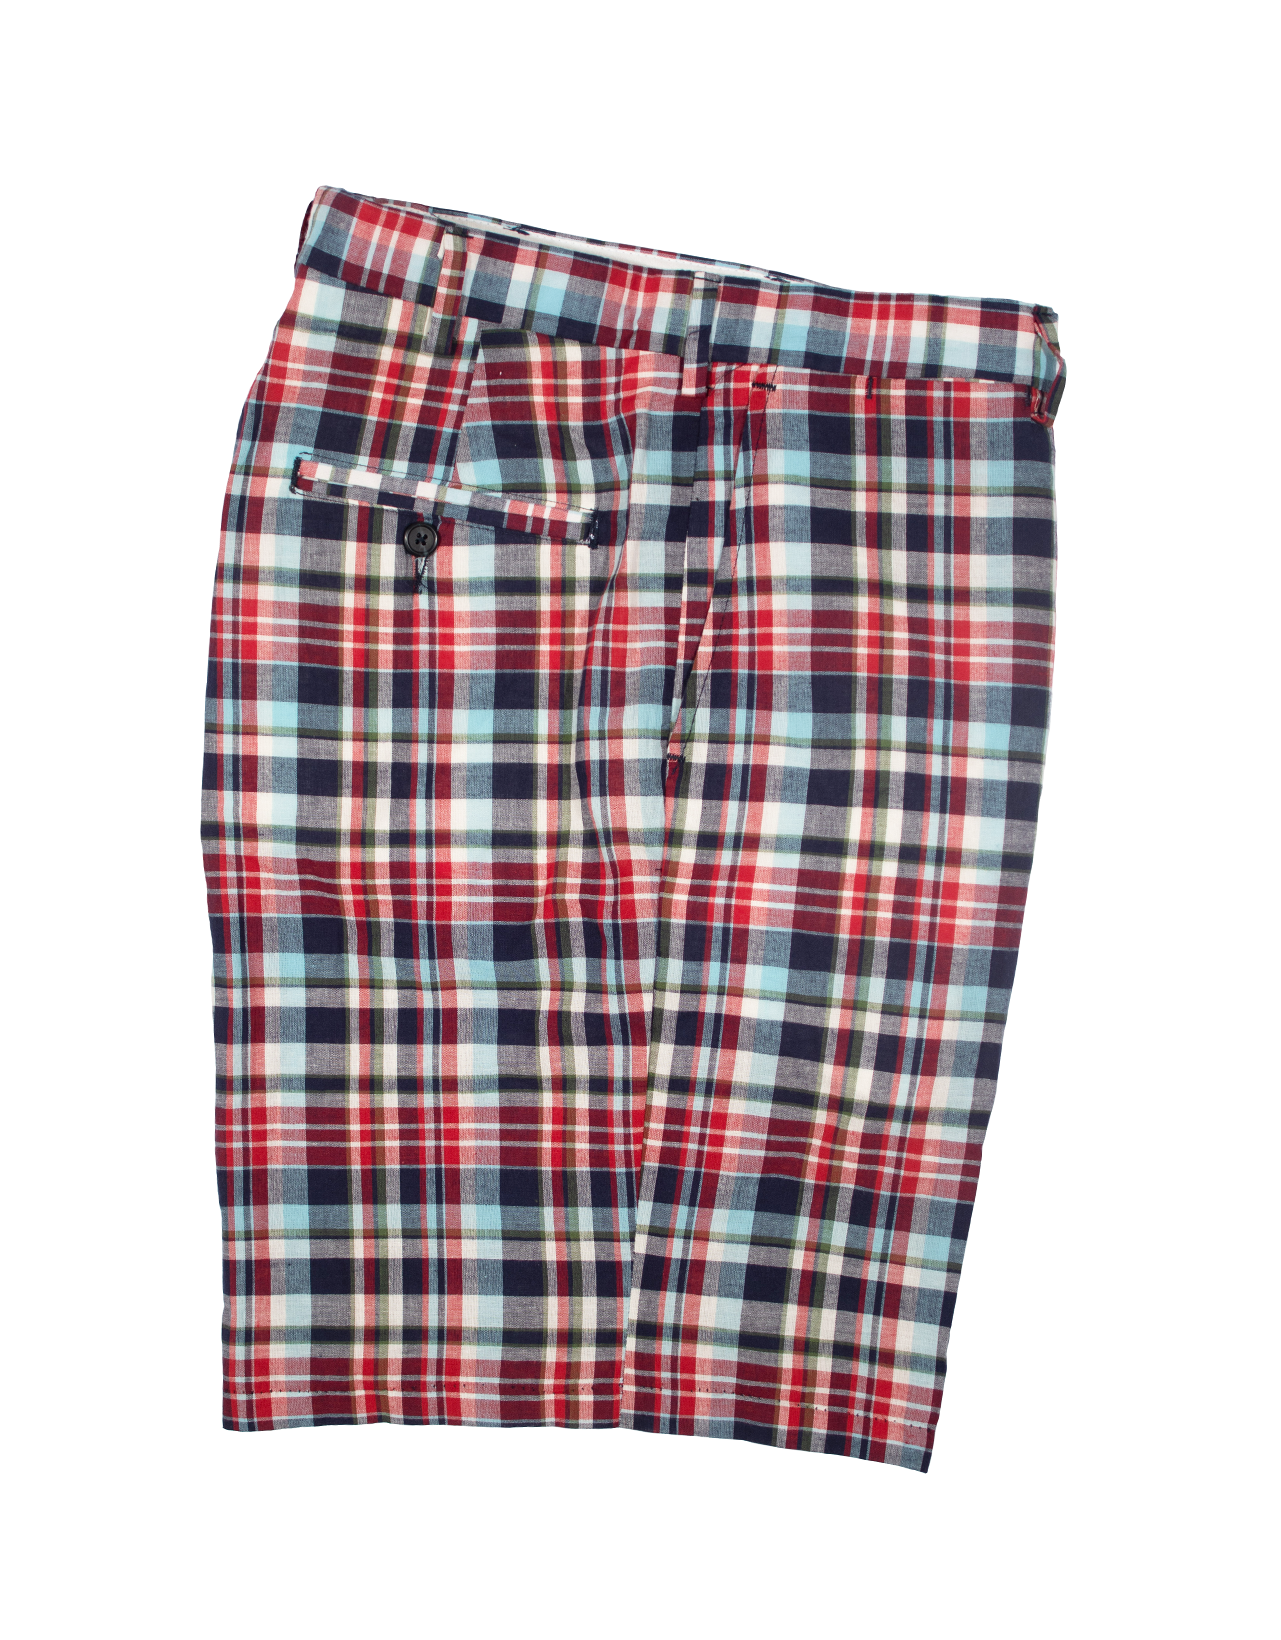 RED NAVY GREEN MADRAS SHORTS - CLASSIC FIT